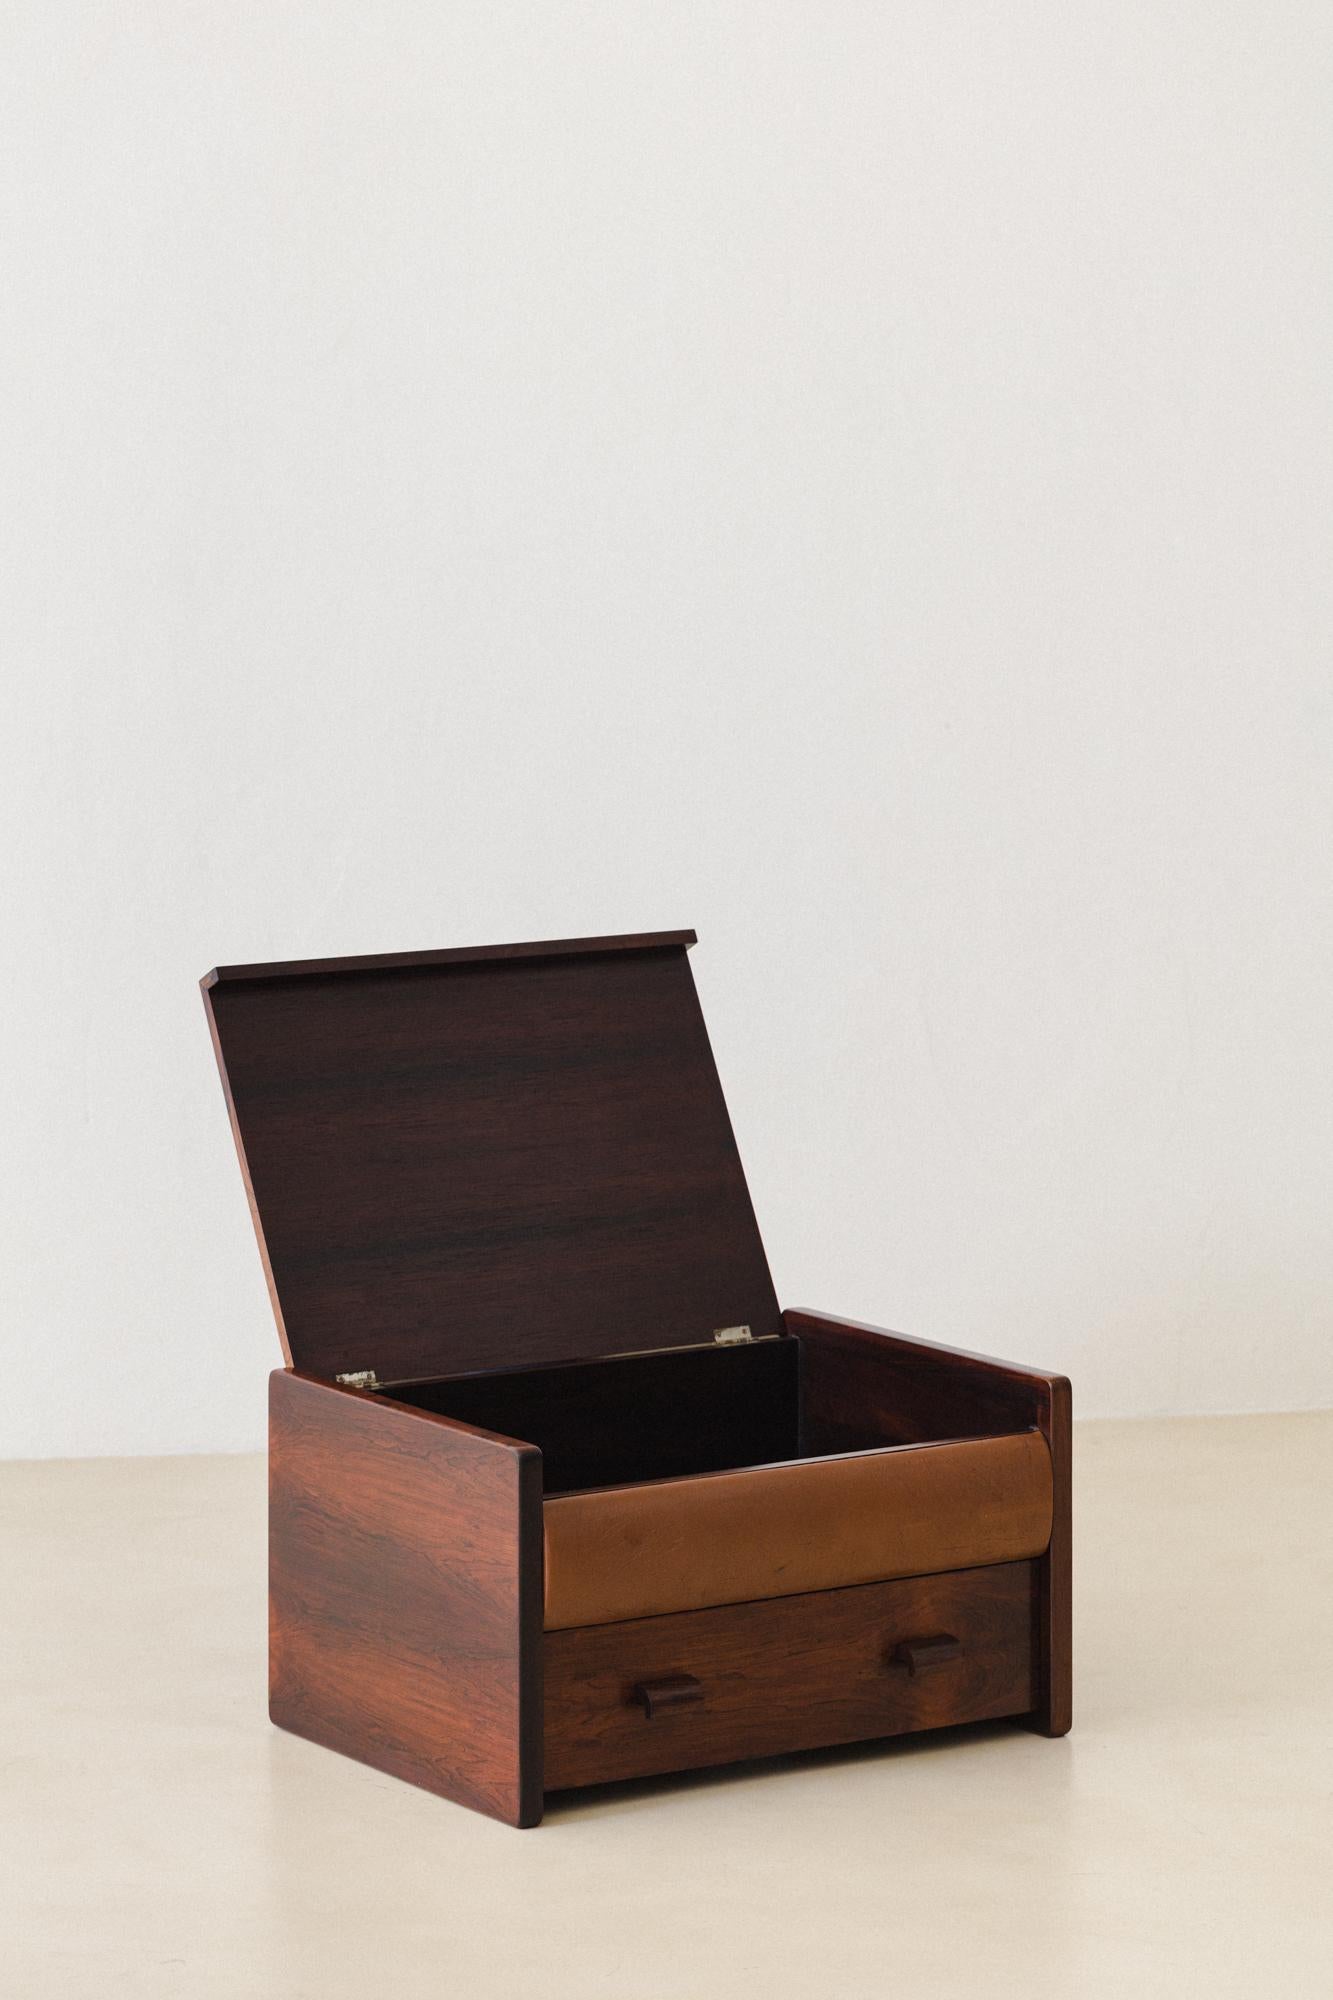 This Storage Chest made of Brazilian Rosewood with a leather detail was produced by Celina Decorações in the 1960s. Inside, there is a lot of space to keep your belongings.

In this period, Brazilian furniture with modern design gained more space